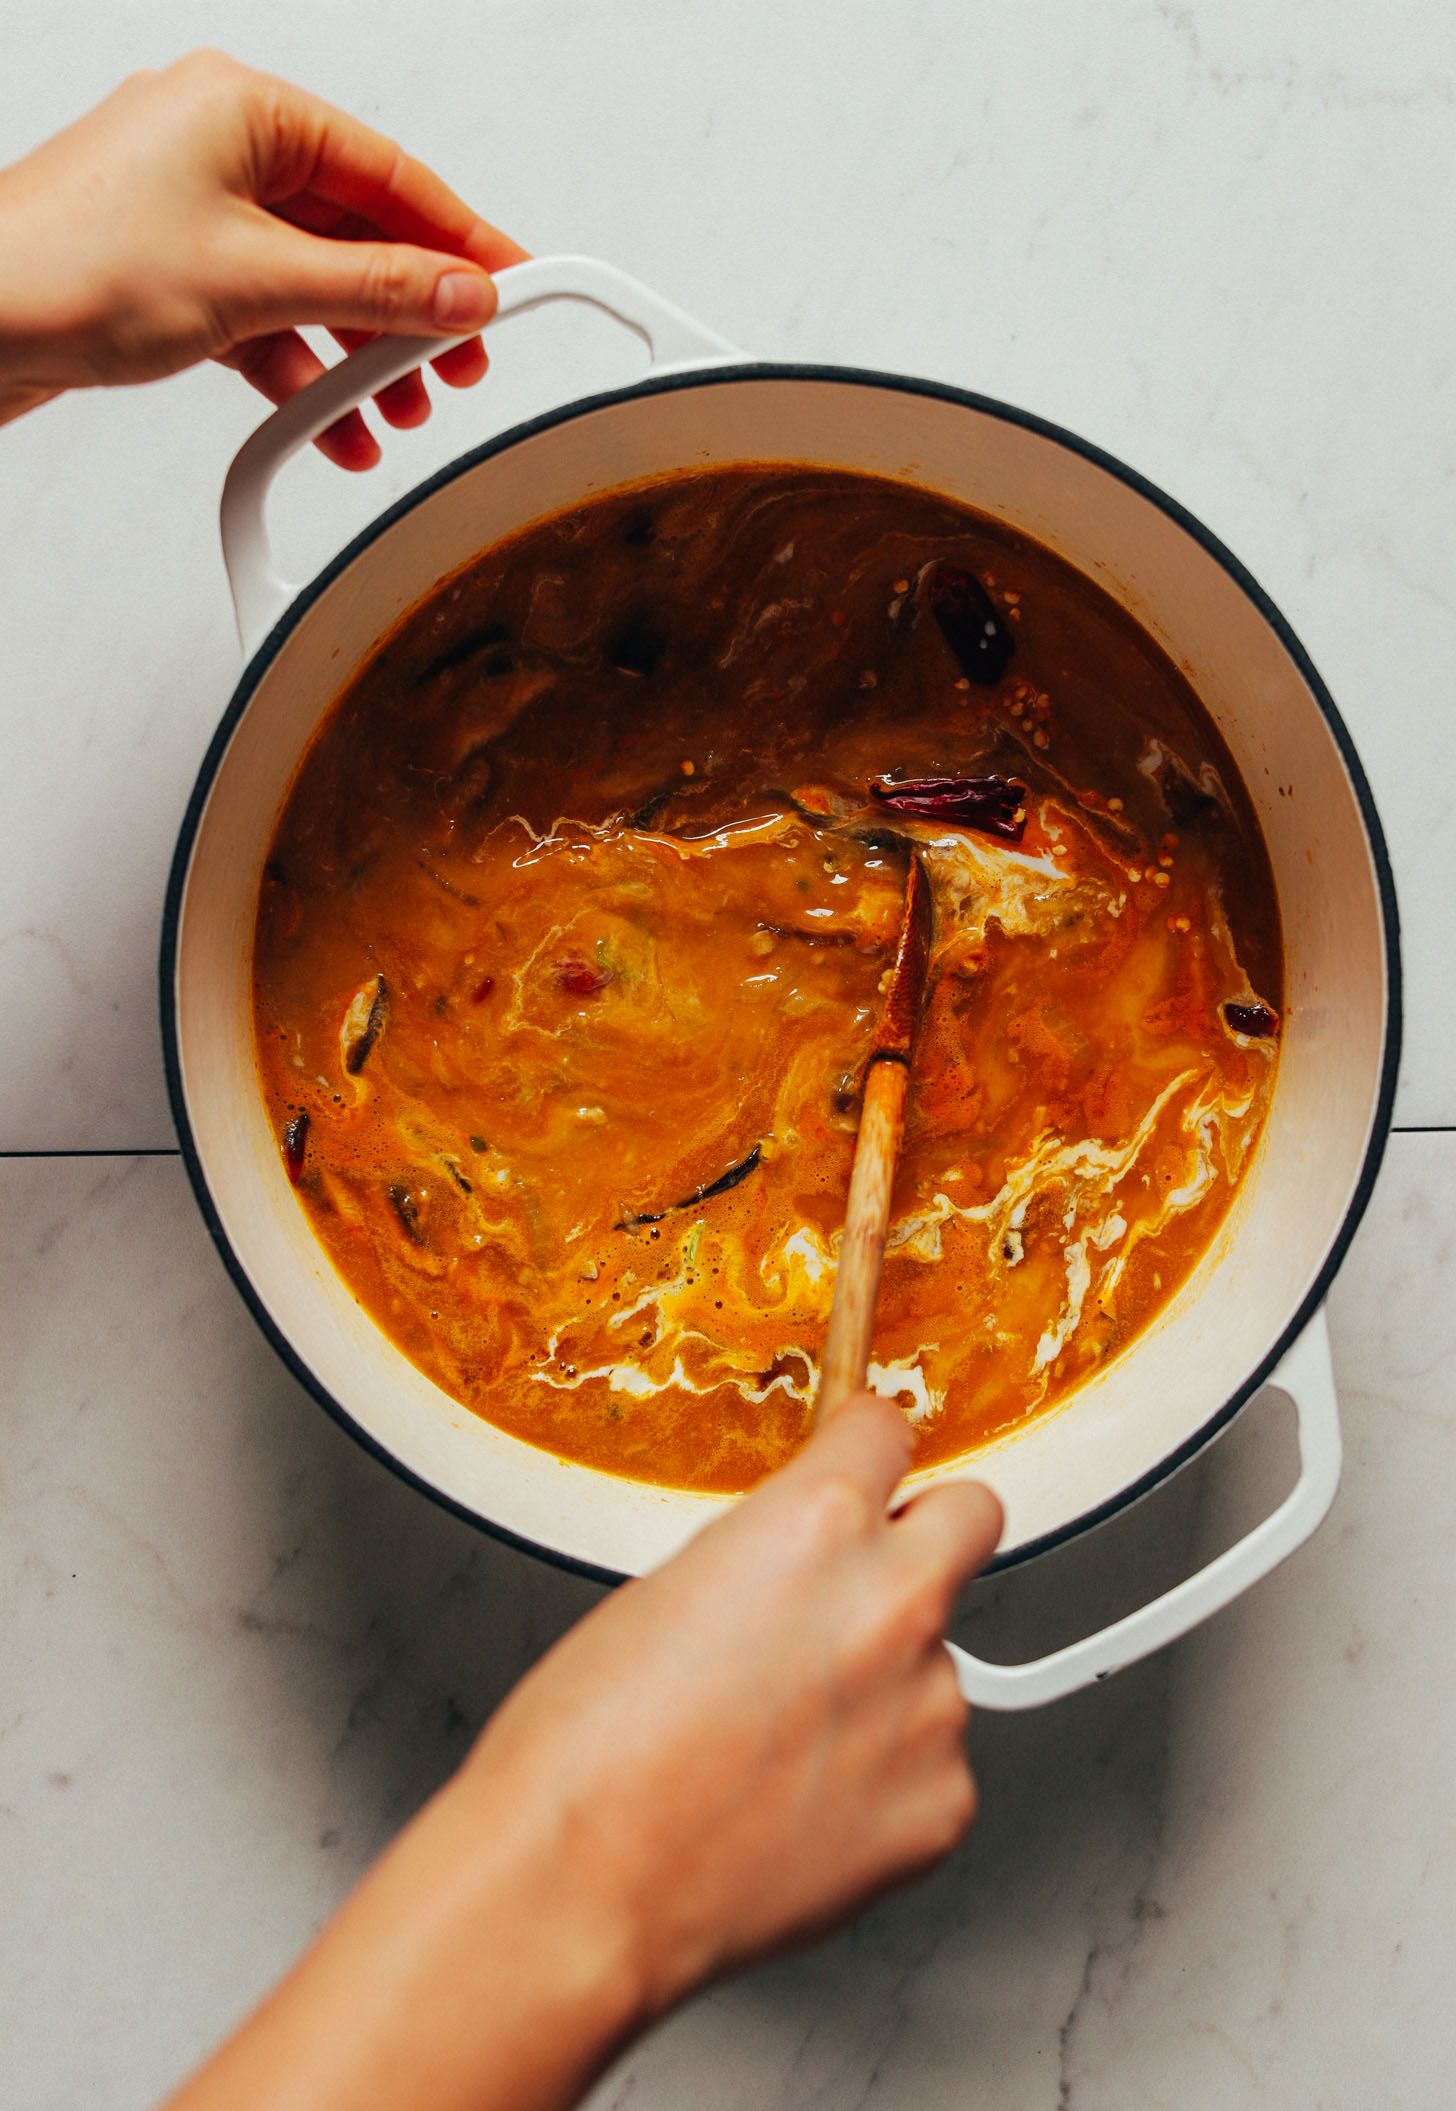 Using a wooden spoon to stir a batch of our homemade Vegan Tom Yum Soup recipe